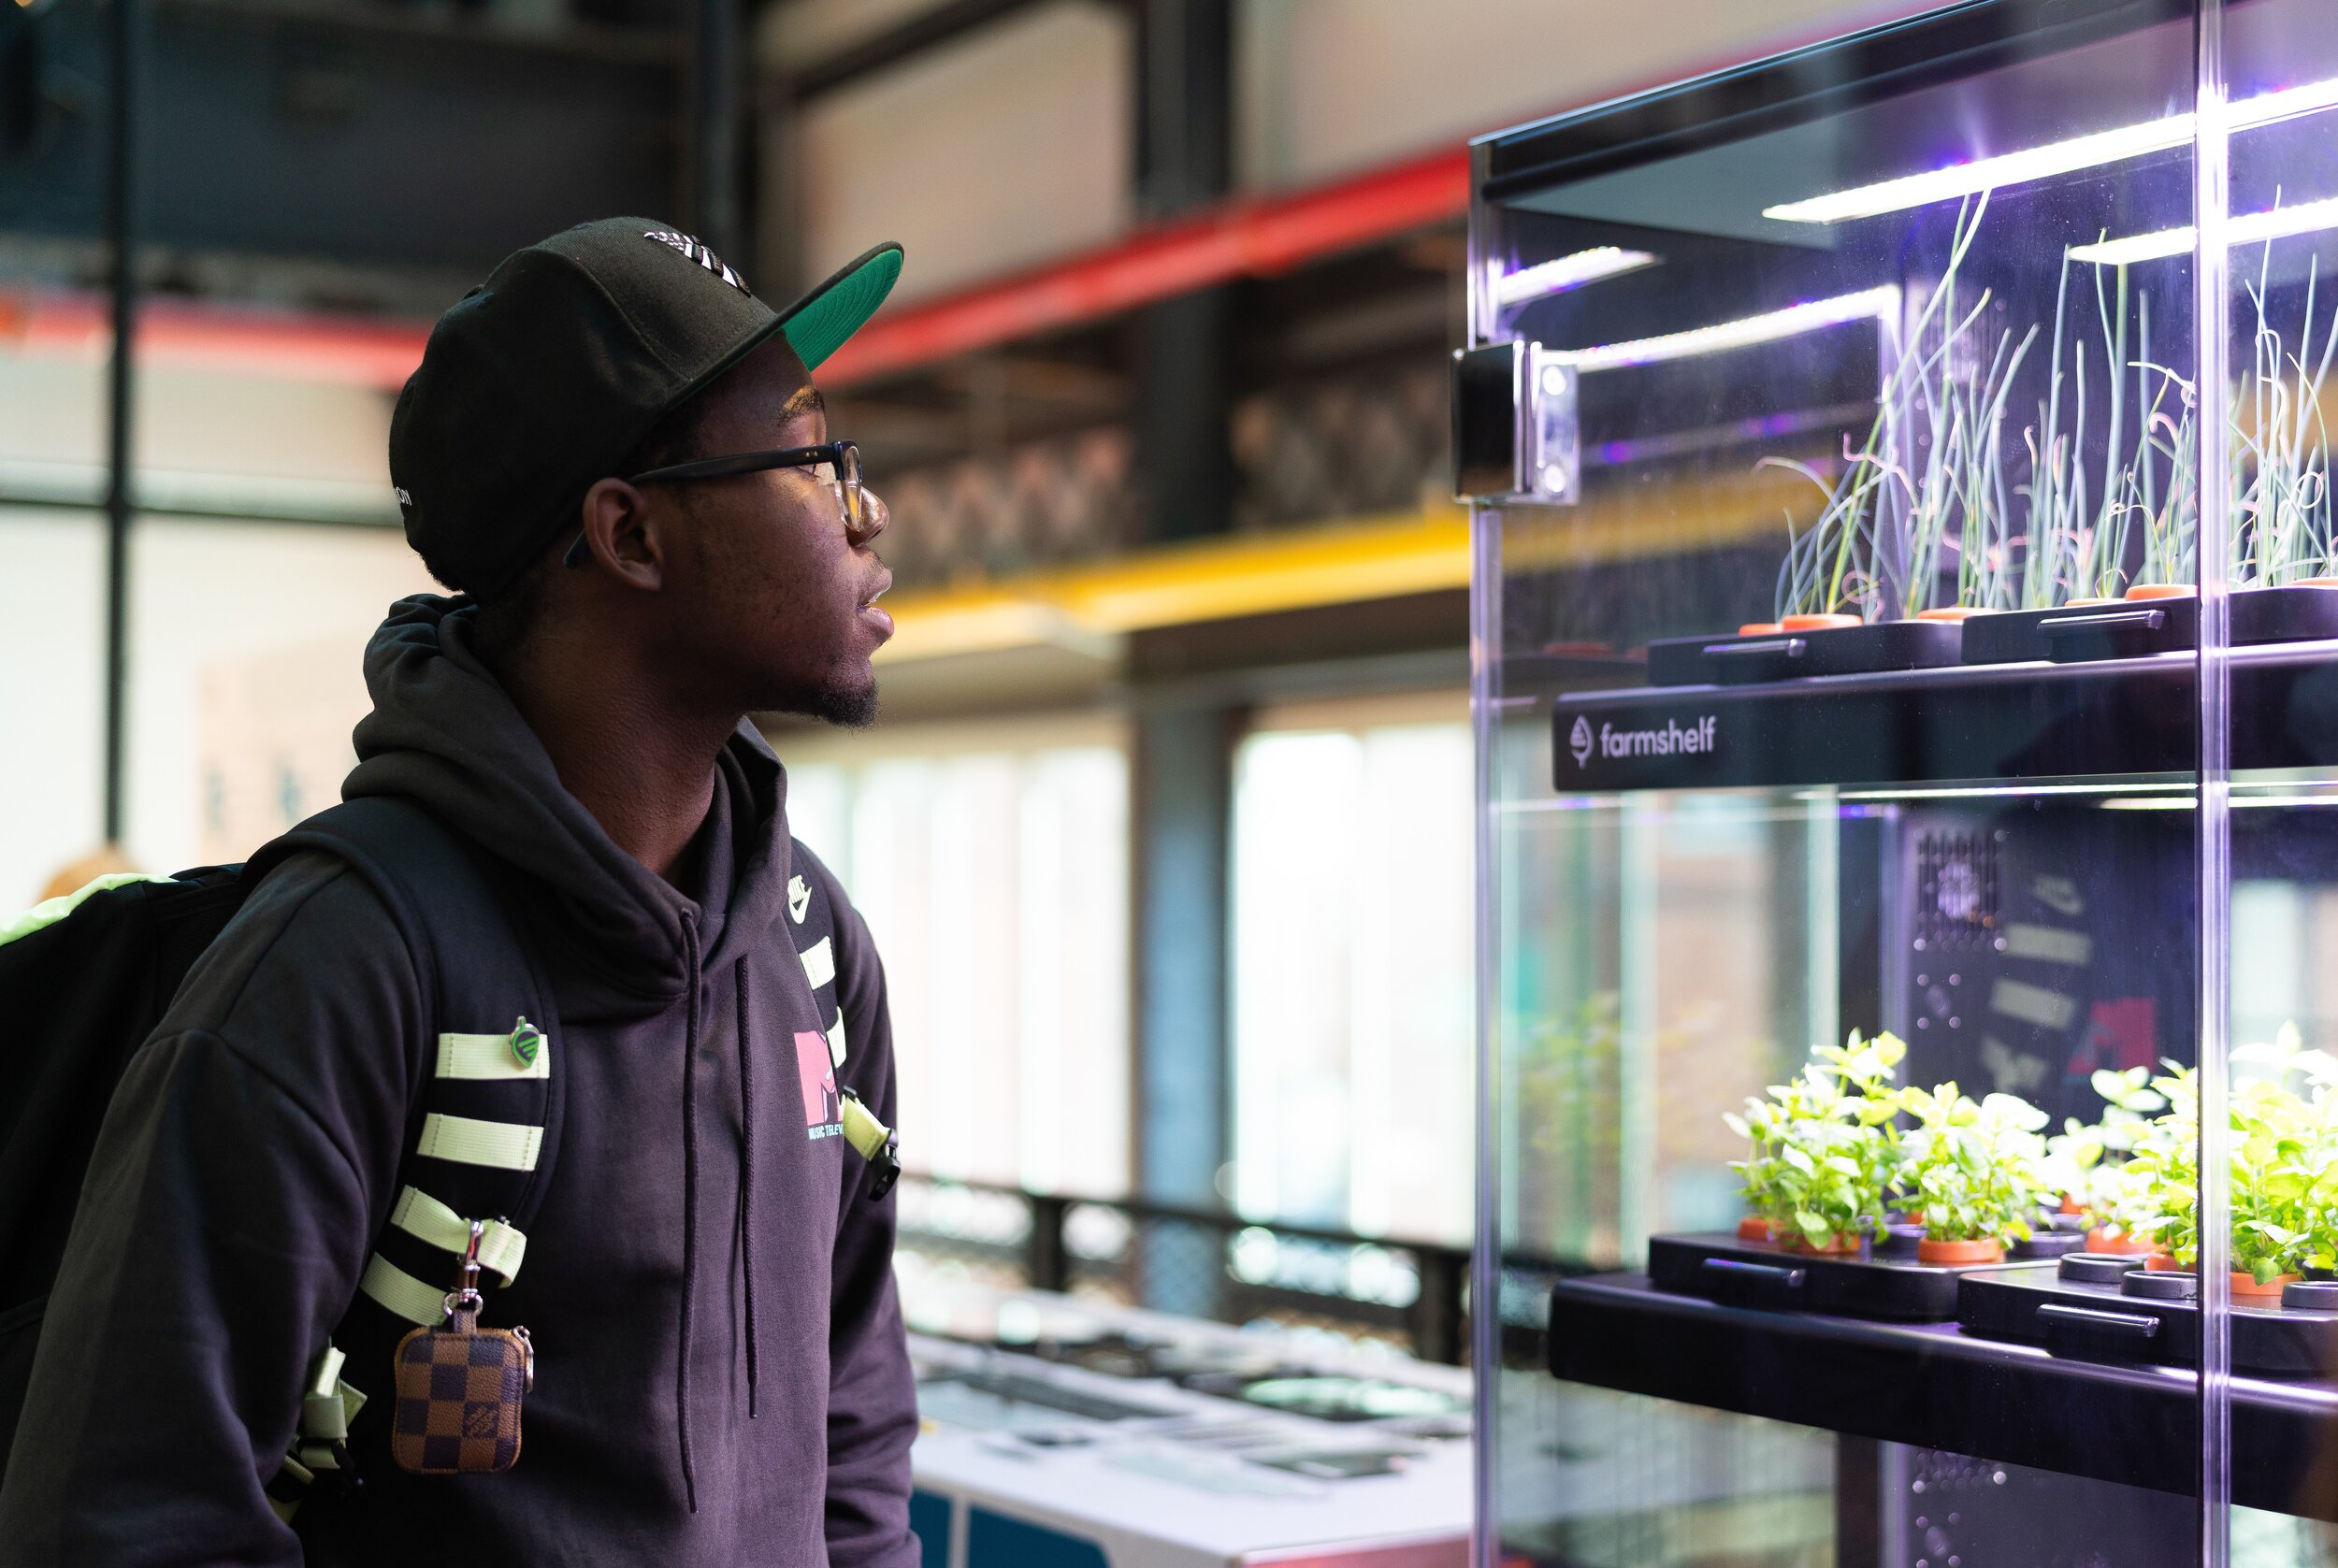   A HE3AT student examines a computer-controlled hydroponics system. An emerging technology in the field of agriculture.&nbsp;  